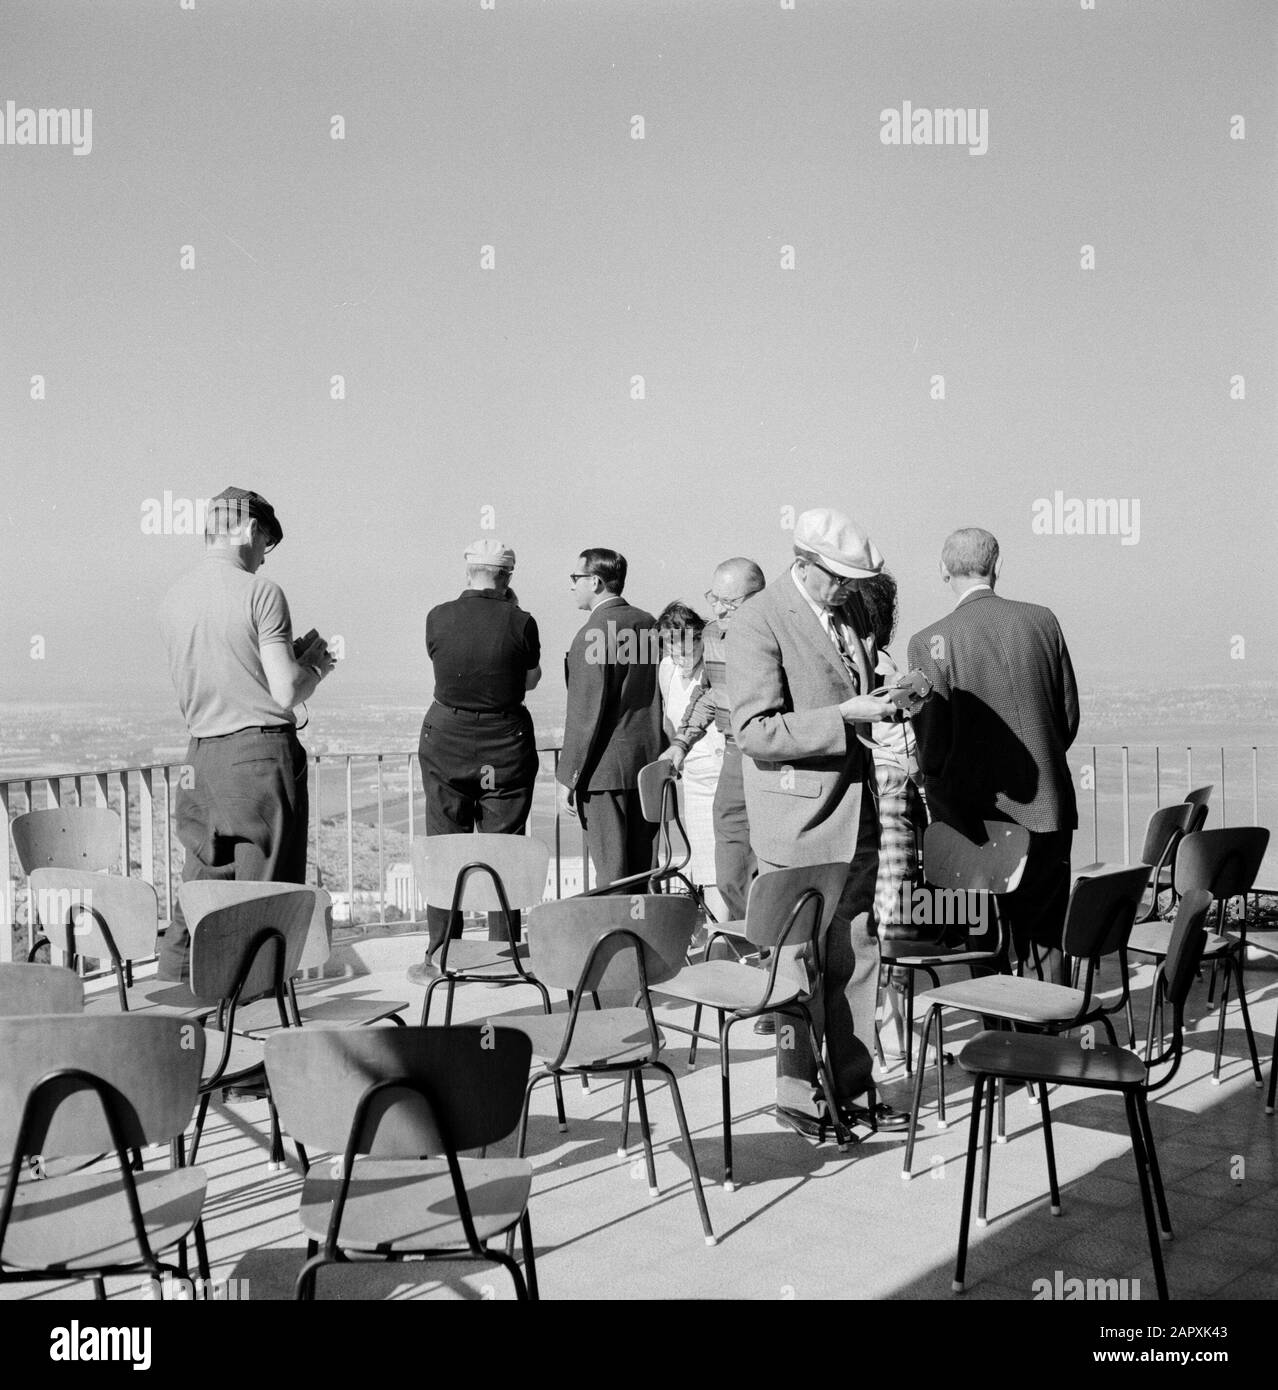 Israel 1964-1965: Haifa, Technion  Students on the terrace of a university building on the grounds of the Technion Annotation: The Technion, founded in 1924 in Haifa on the Carmel Mountains, is a Israeli university specializing in teaching and research in technological and exact sciences Date: 1964 Location: Haifa, Israel Keywords: buildings, students, terraces, universities Institution name: Technion University Stock Photo